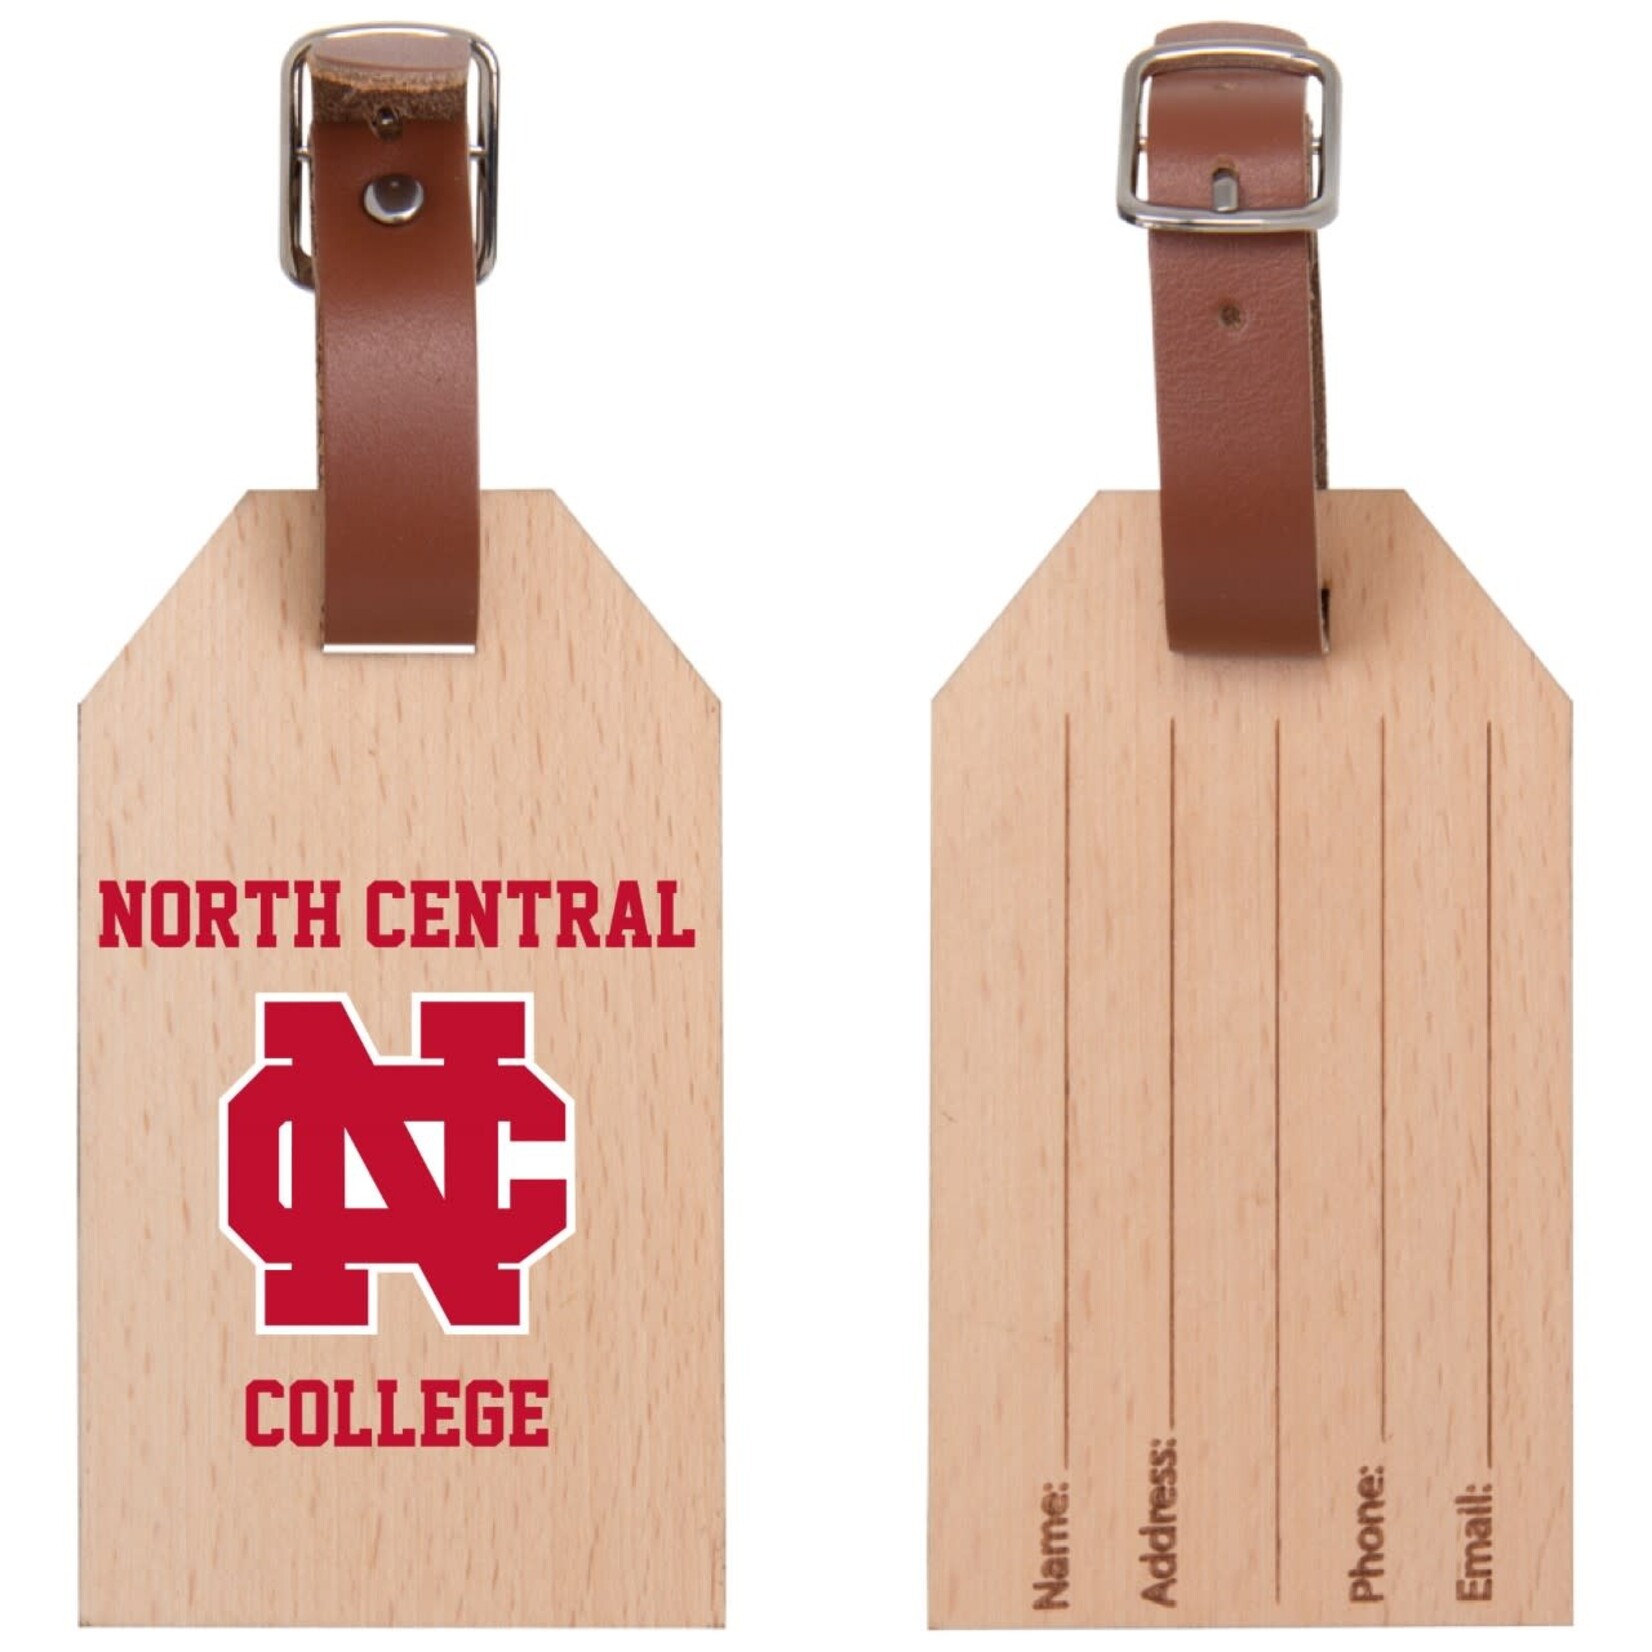 Neil Enterprises New North Central College Beechwood luggage Tag